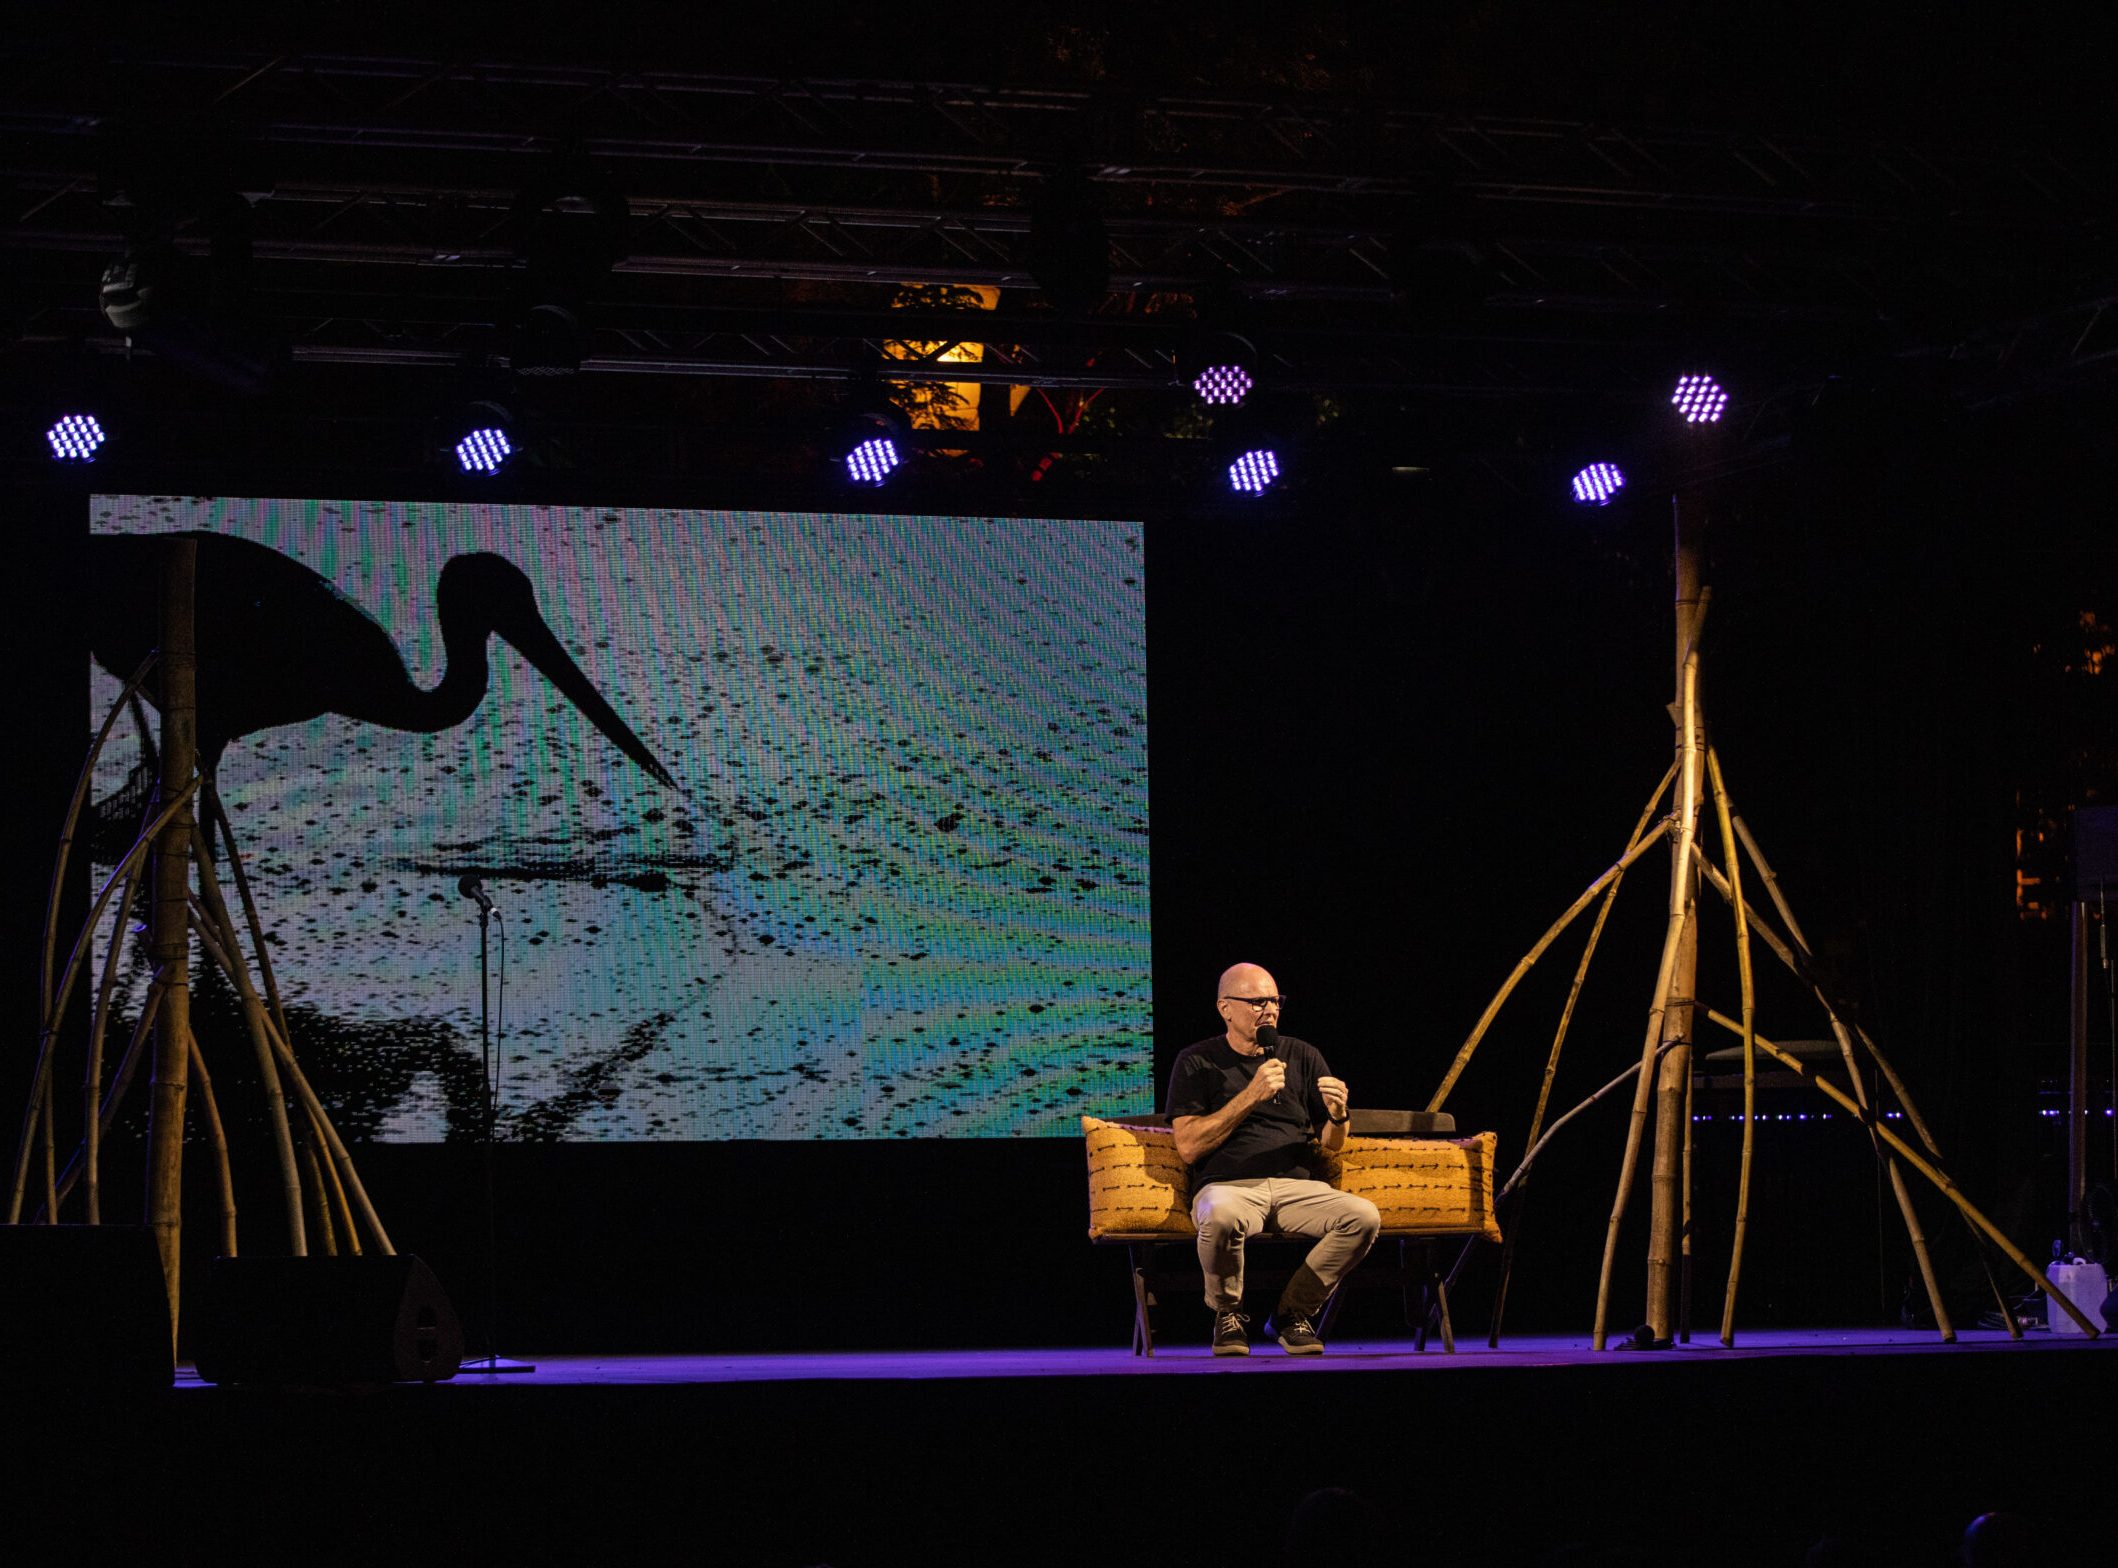 Photograph of a person sitting on stage on a seat with a bird being projected behind them. They are talking into the microphone.